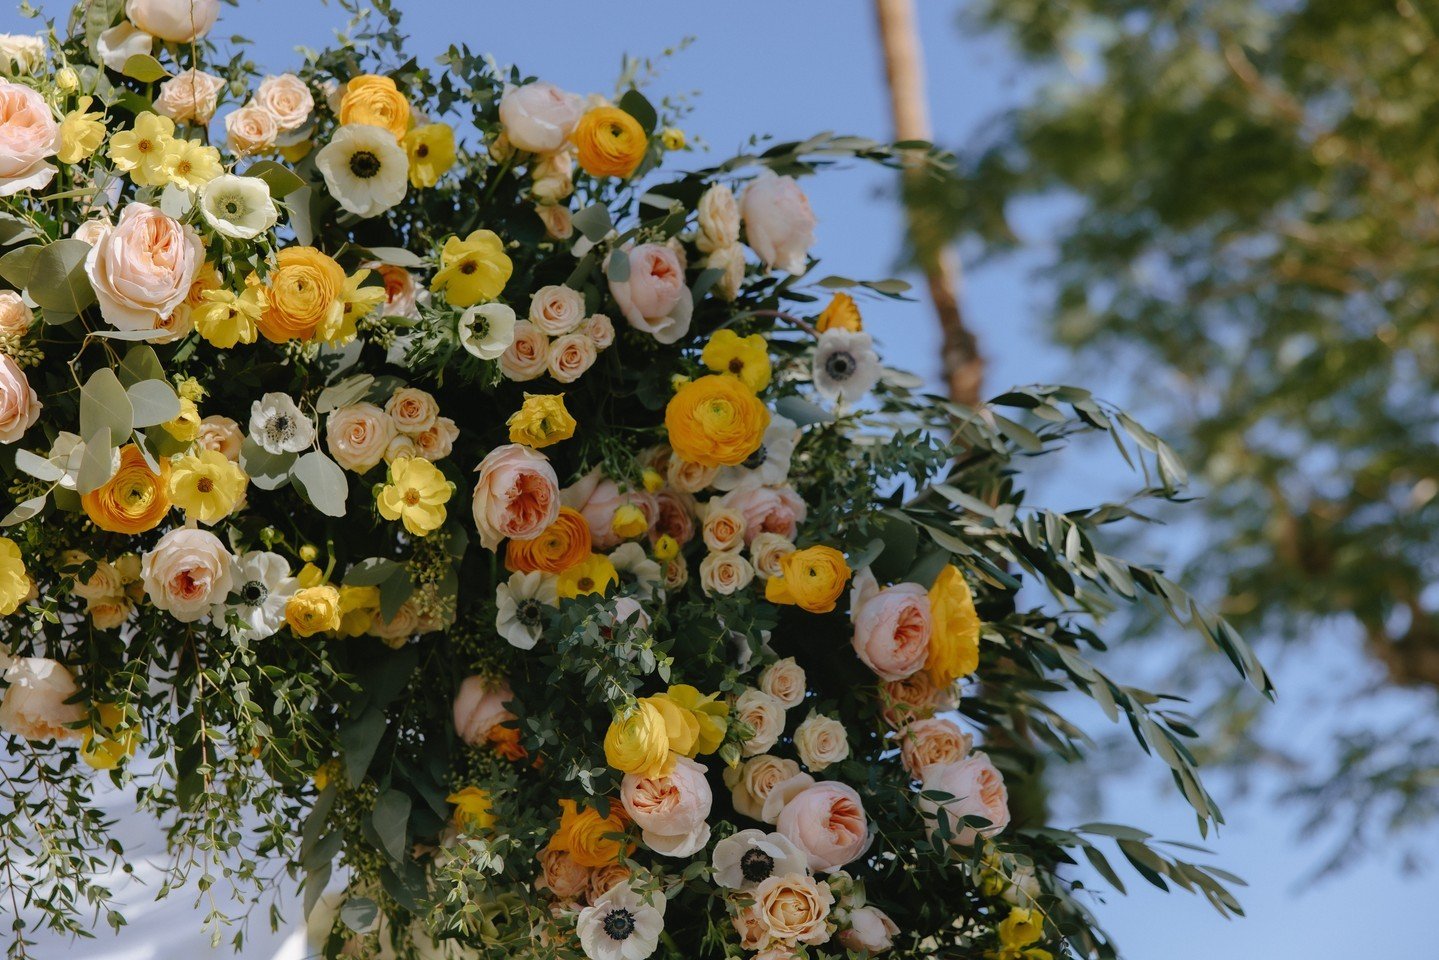 Yellow, orange, and blush 💛🧡💖 The perfect combination for a wedding ceremony.
&hellip;
#artisaninspiration #palmspringswedding #artisanevents #artisaneventfloraldecor #colorfulblooms #weddingfloral